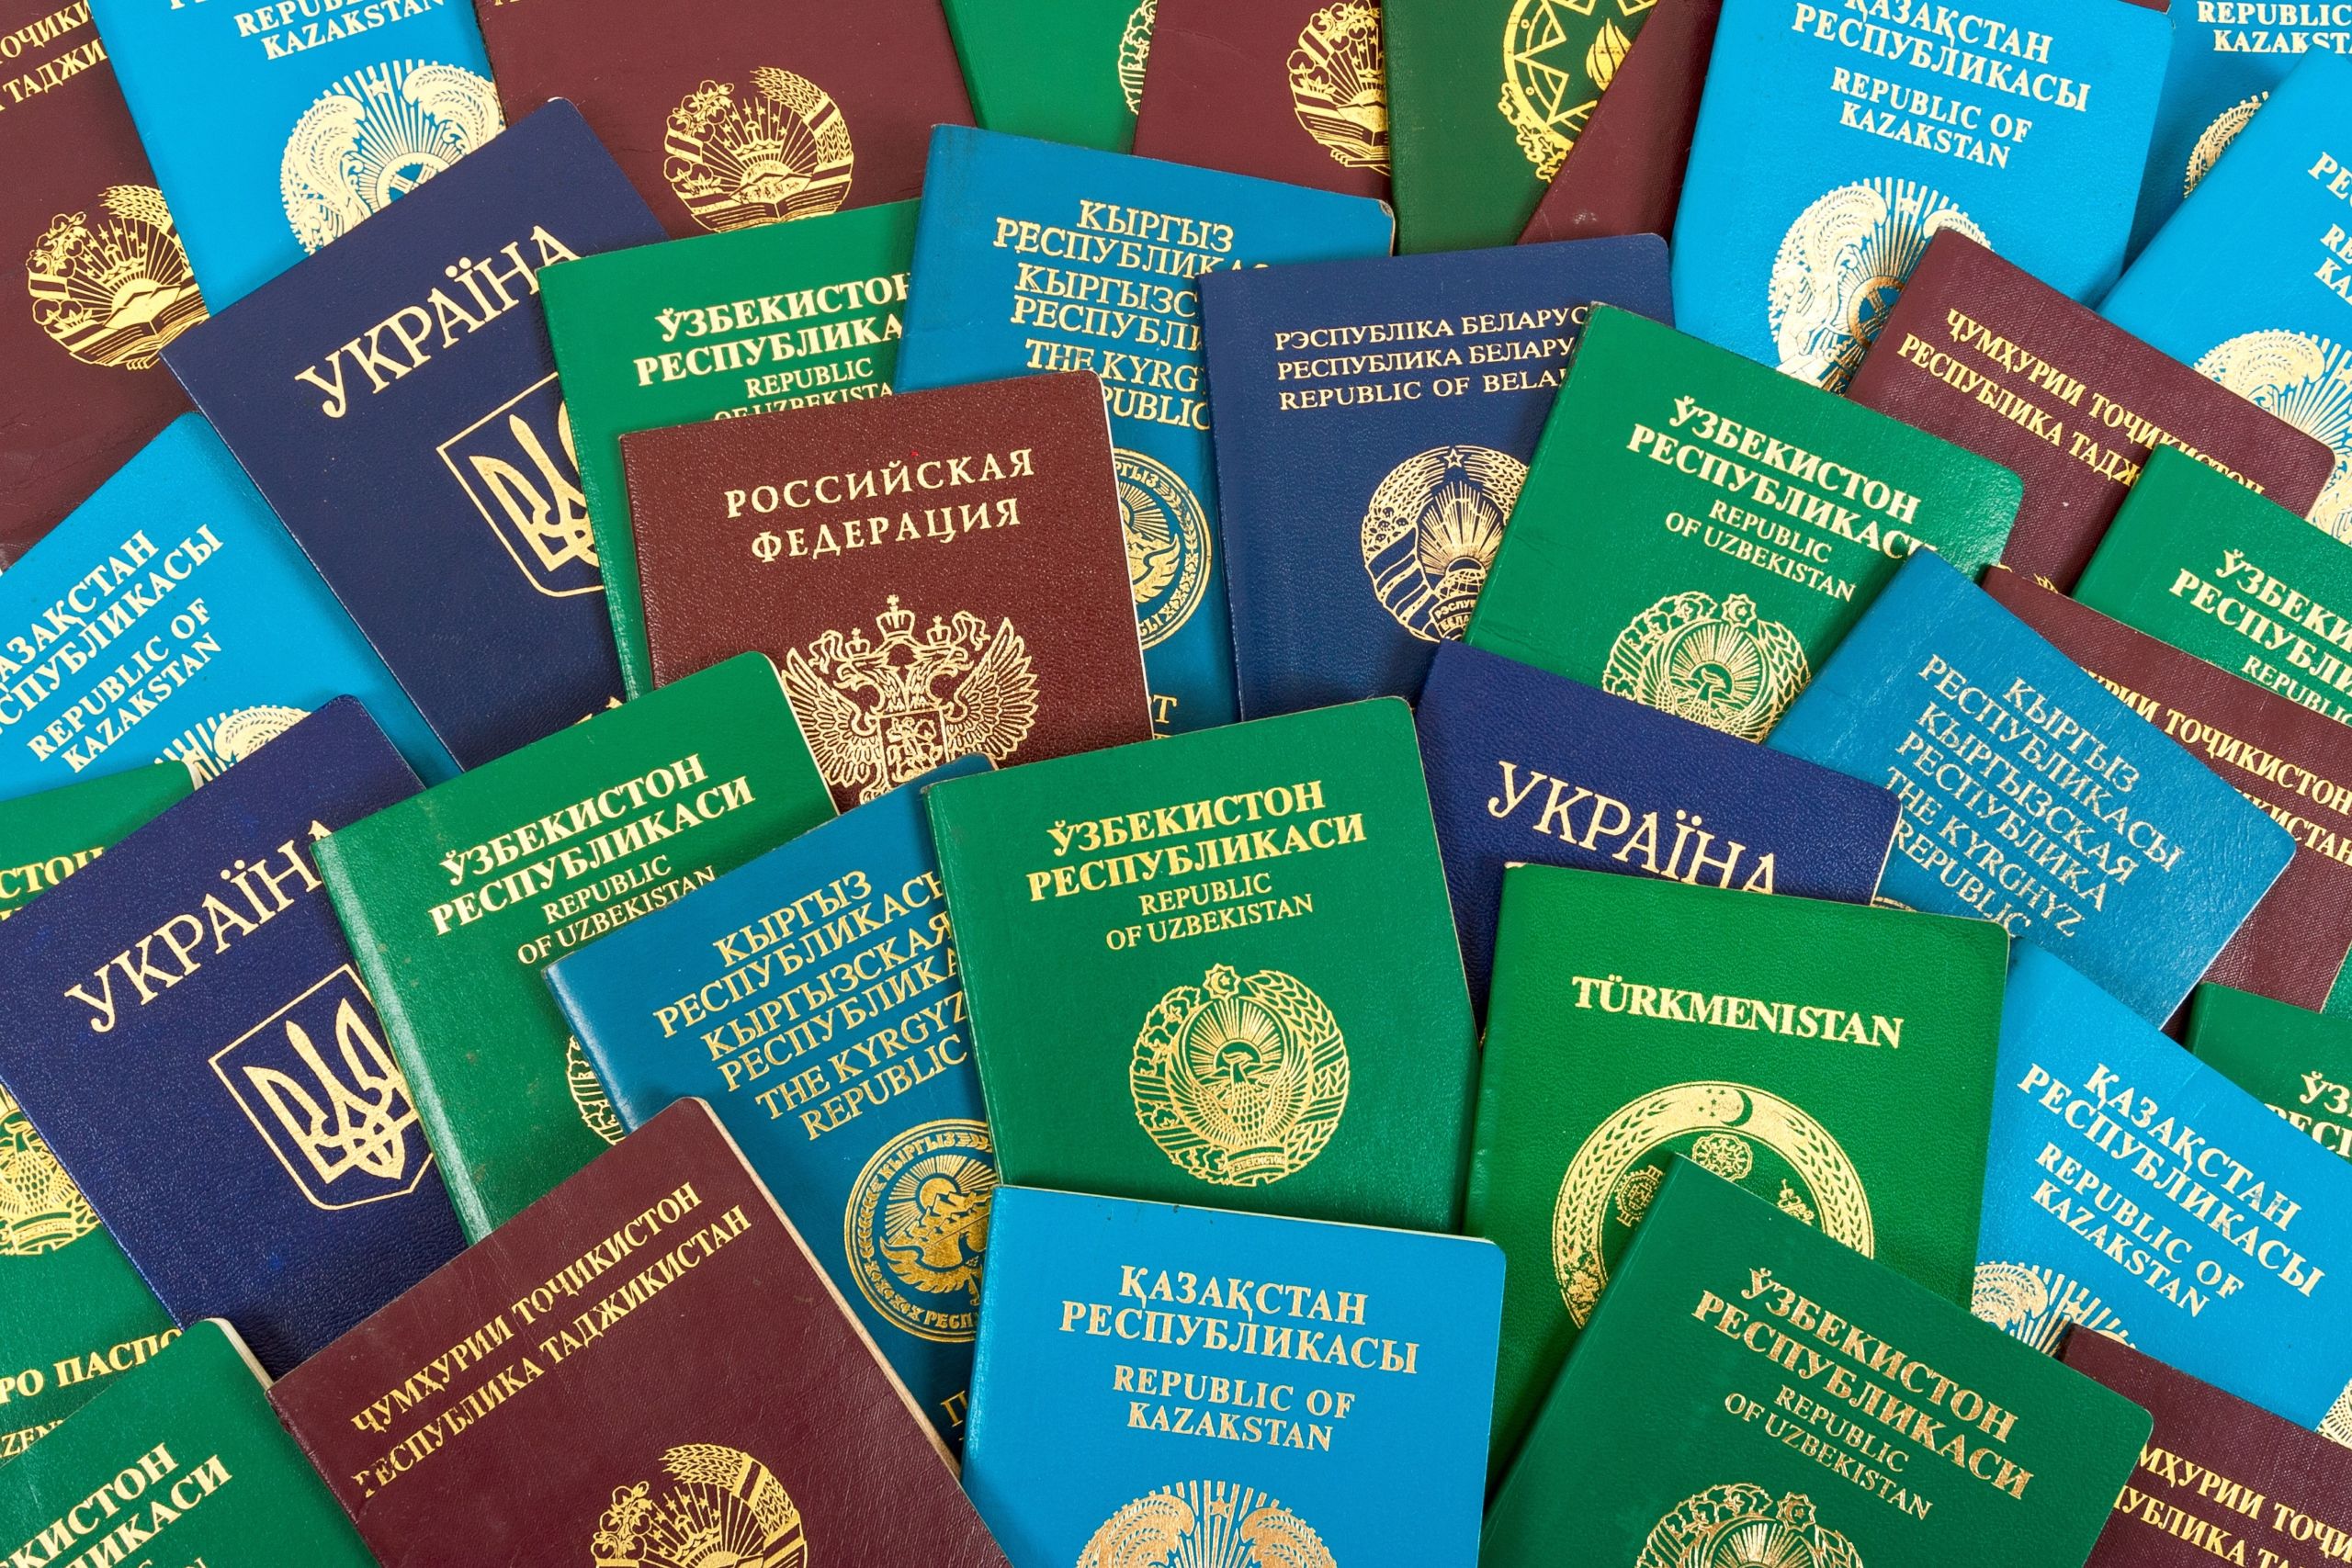 19551146 - different foreign passports as background